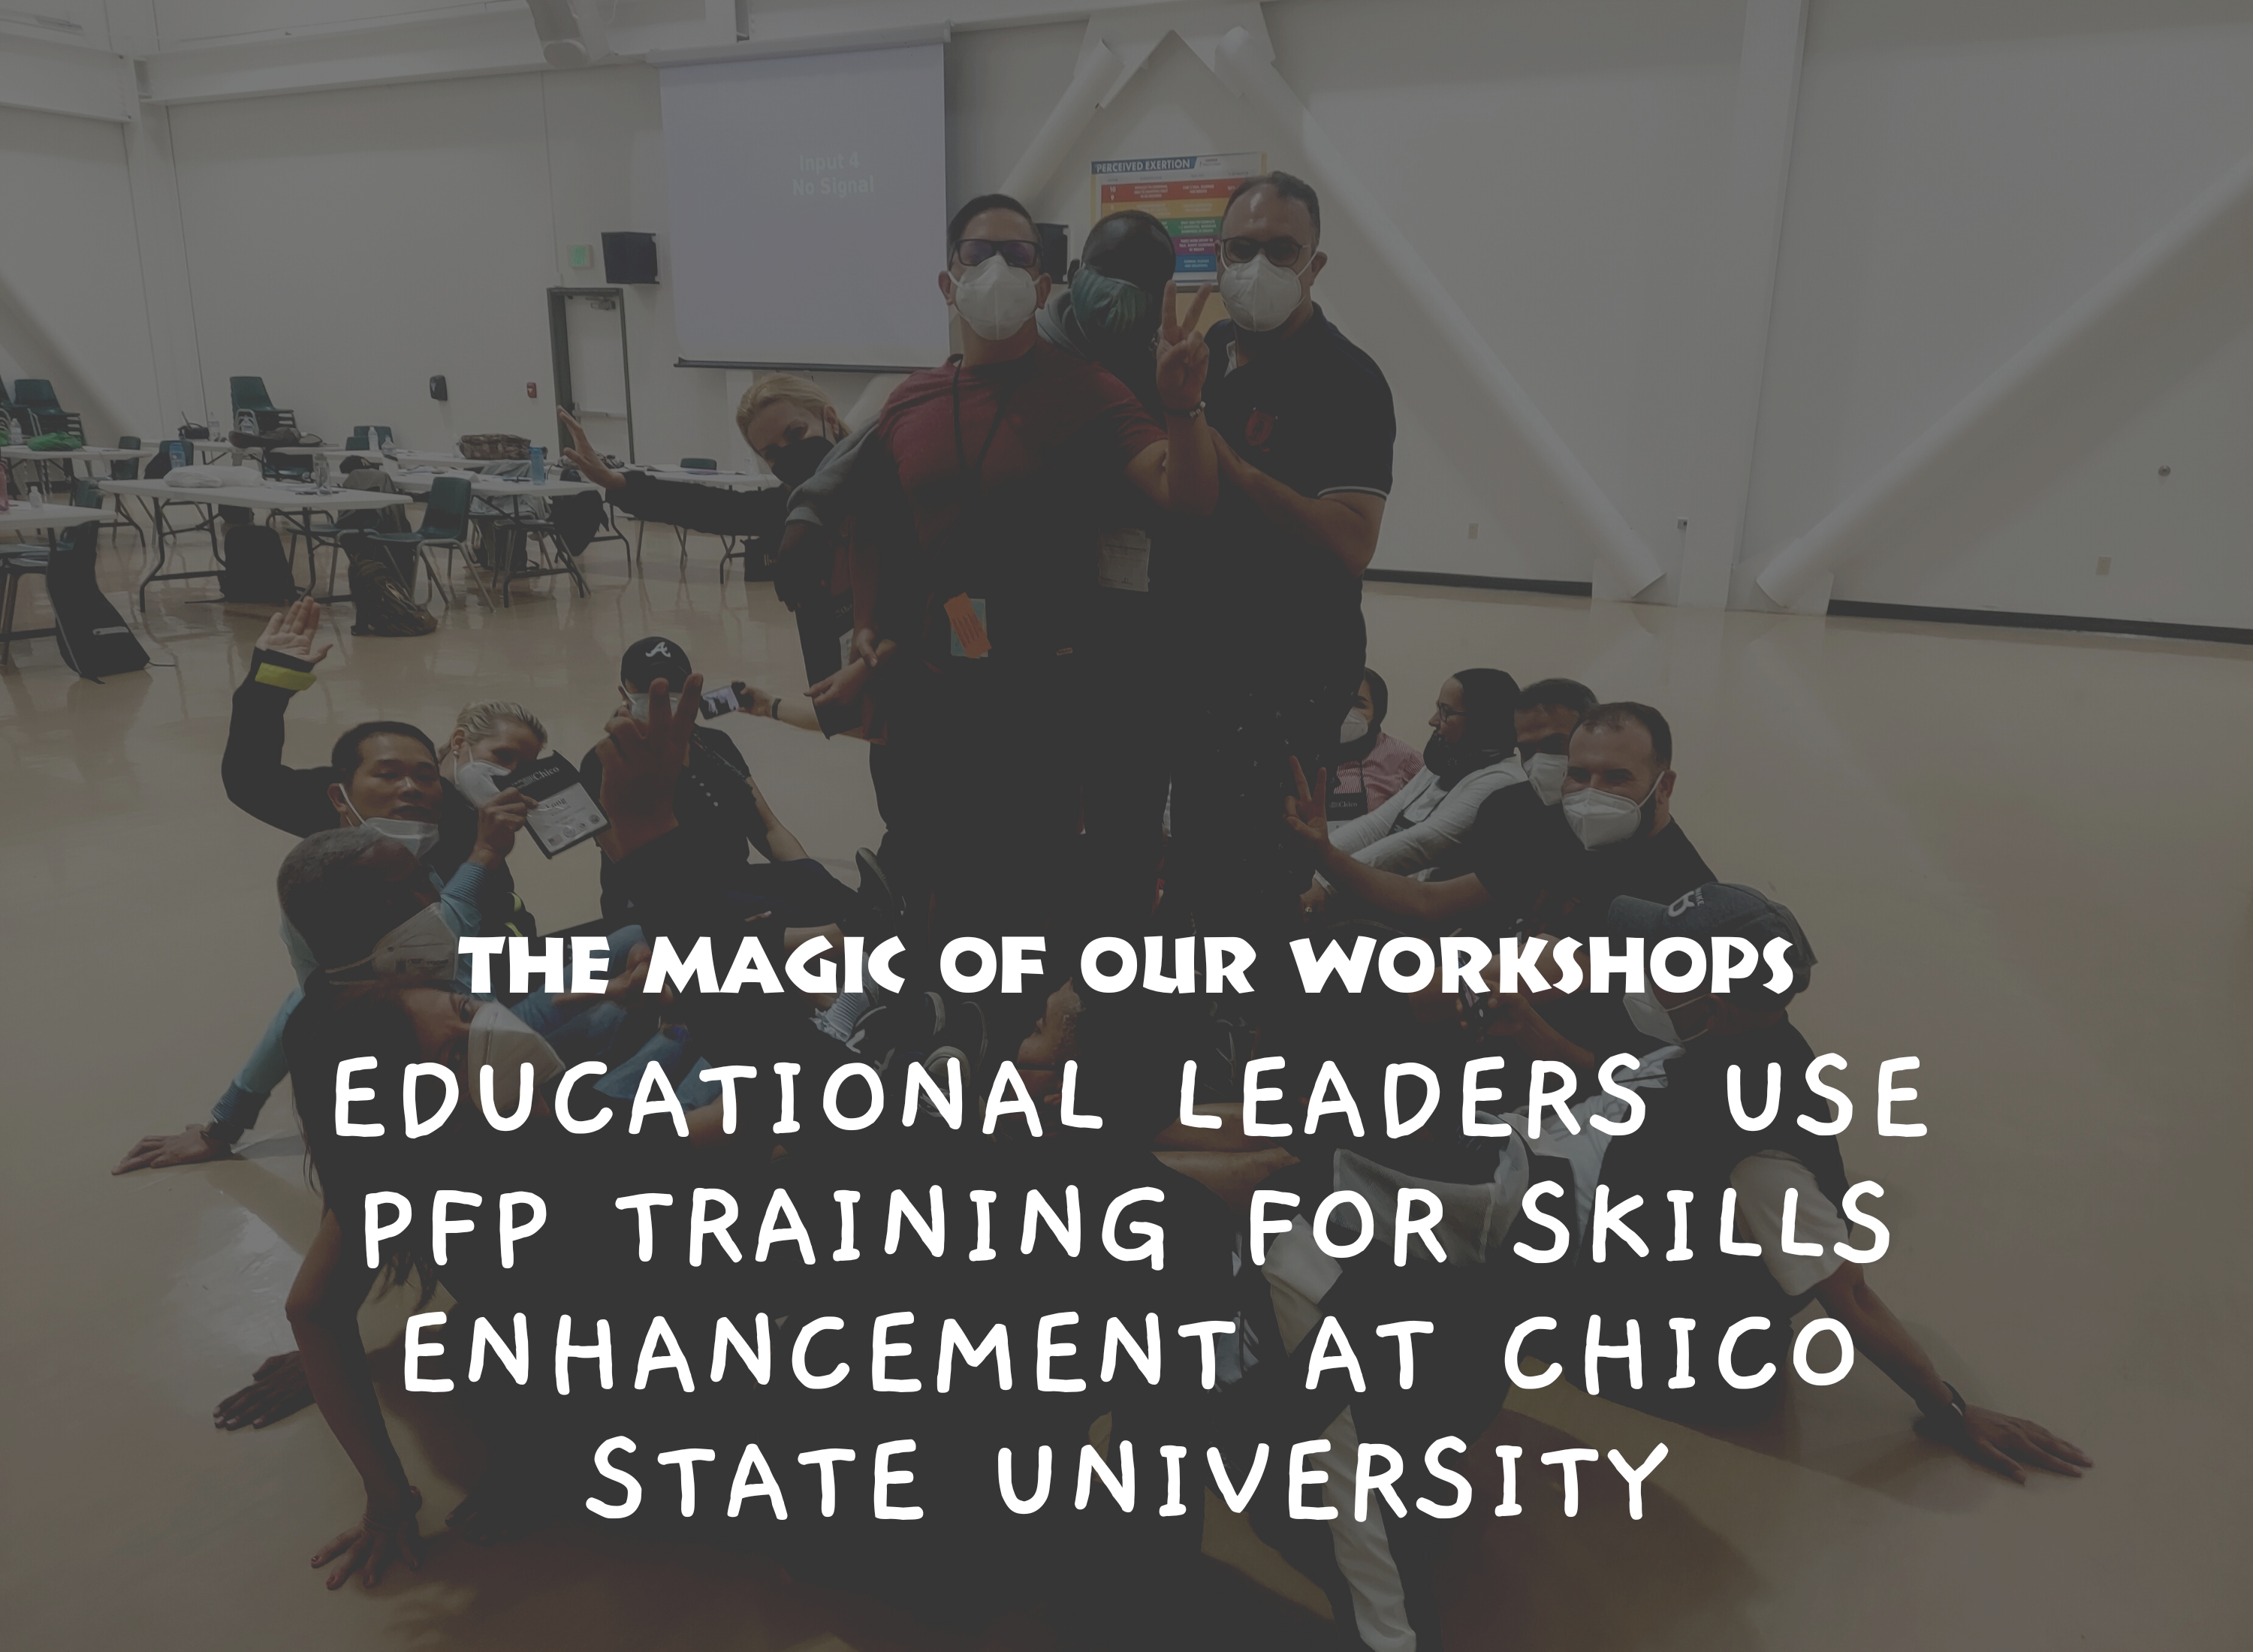 Leading a Successful Workshop at Chico State University